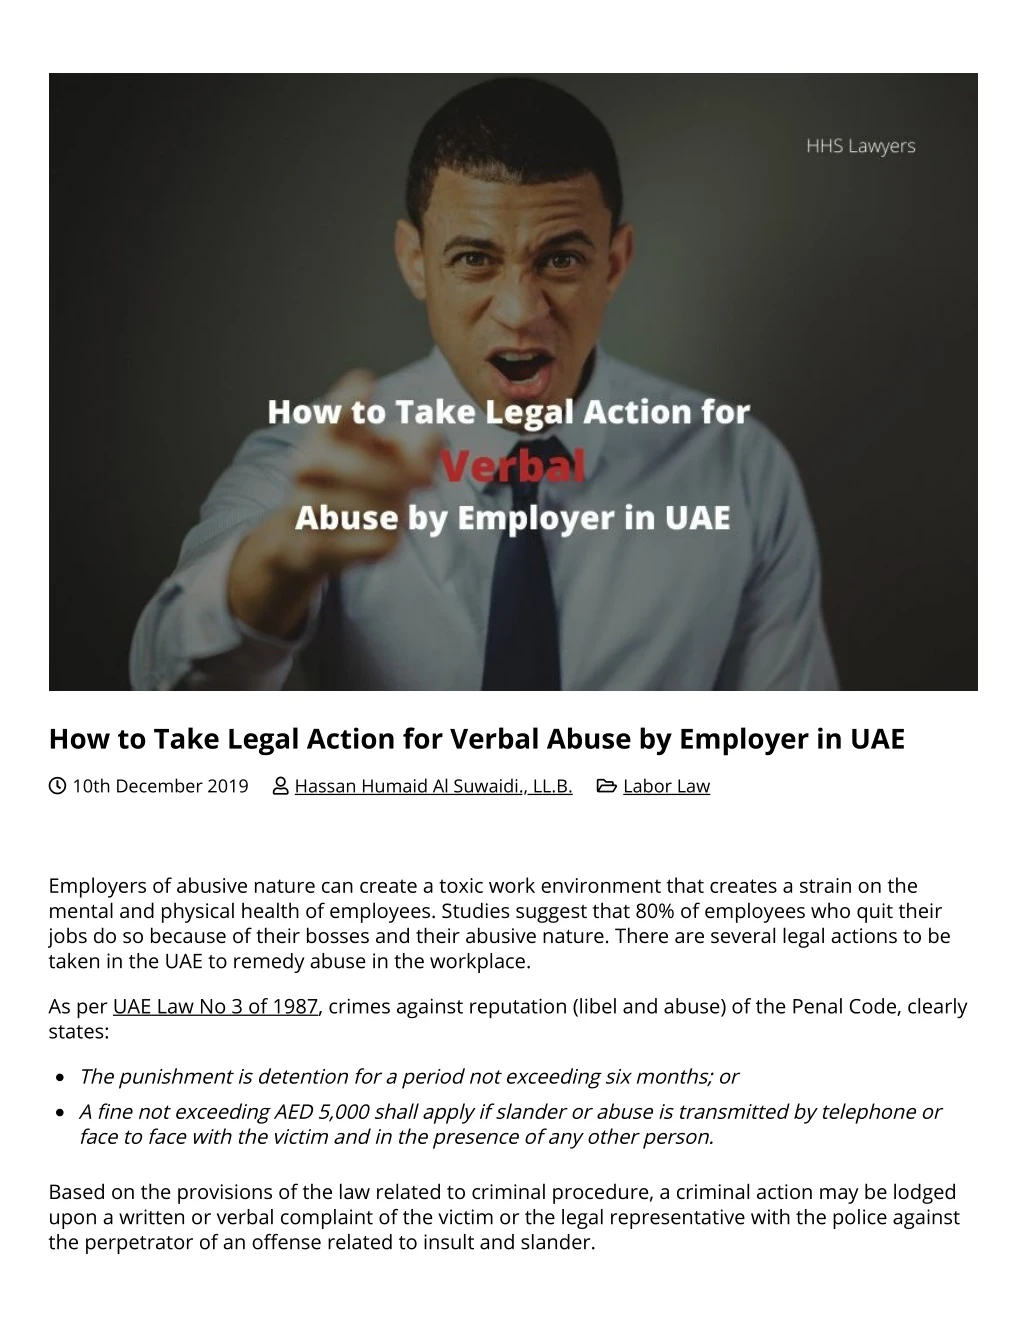 how to take legal action for verbal abuse